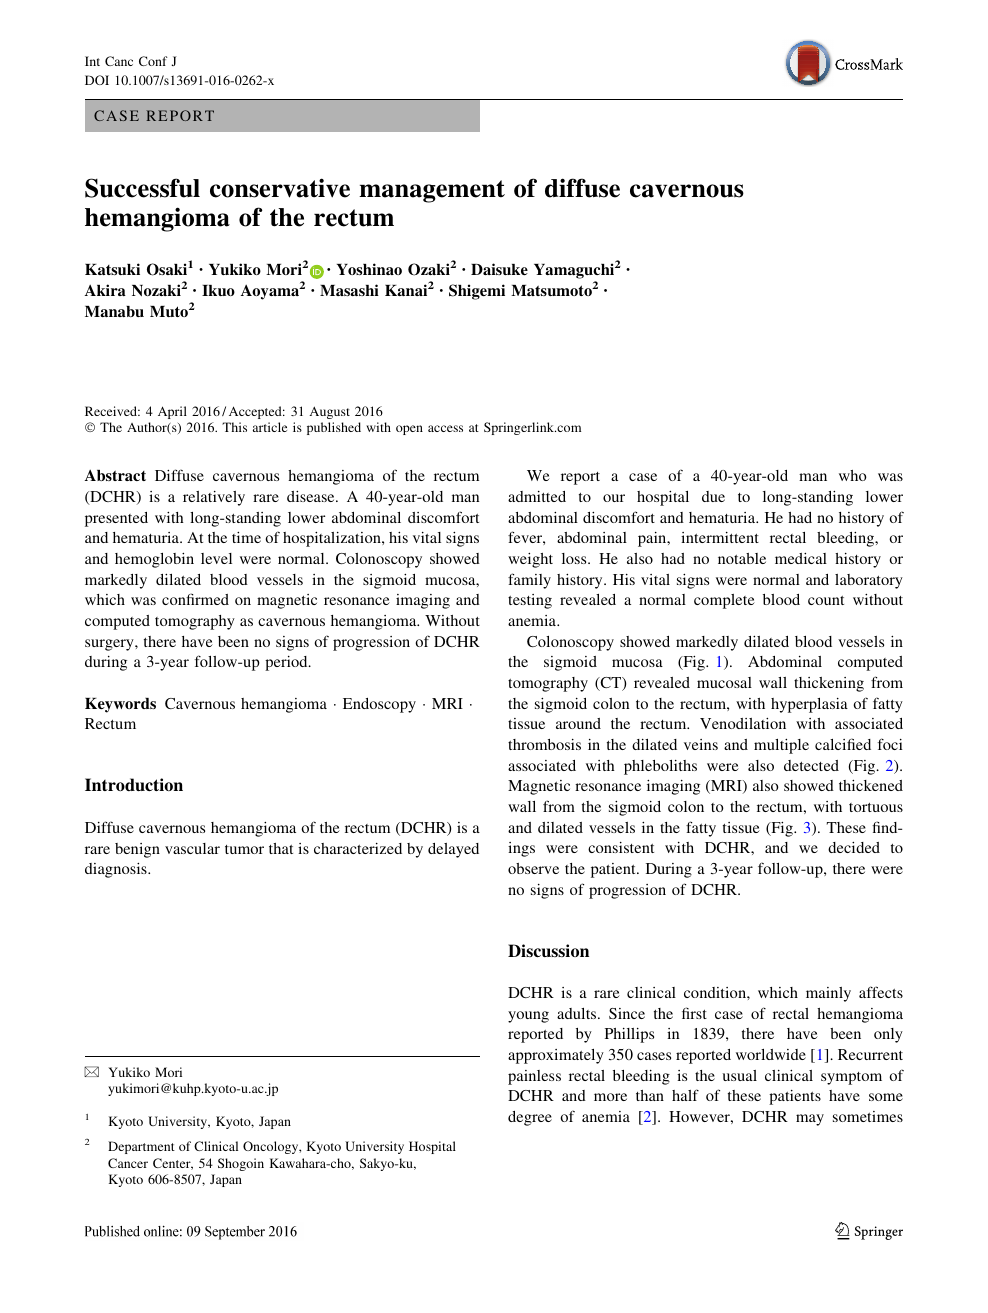 Successful Conservative Management Of Diffuse Cavernous Hemangioma Of The Rectum Topic Of Research Paper In Clinical Medicine Download Scholarly Article Pdf And Read For Free On Cyberleninka Open Science Hub